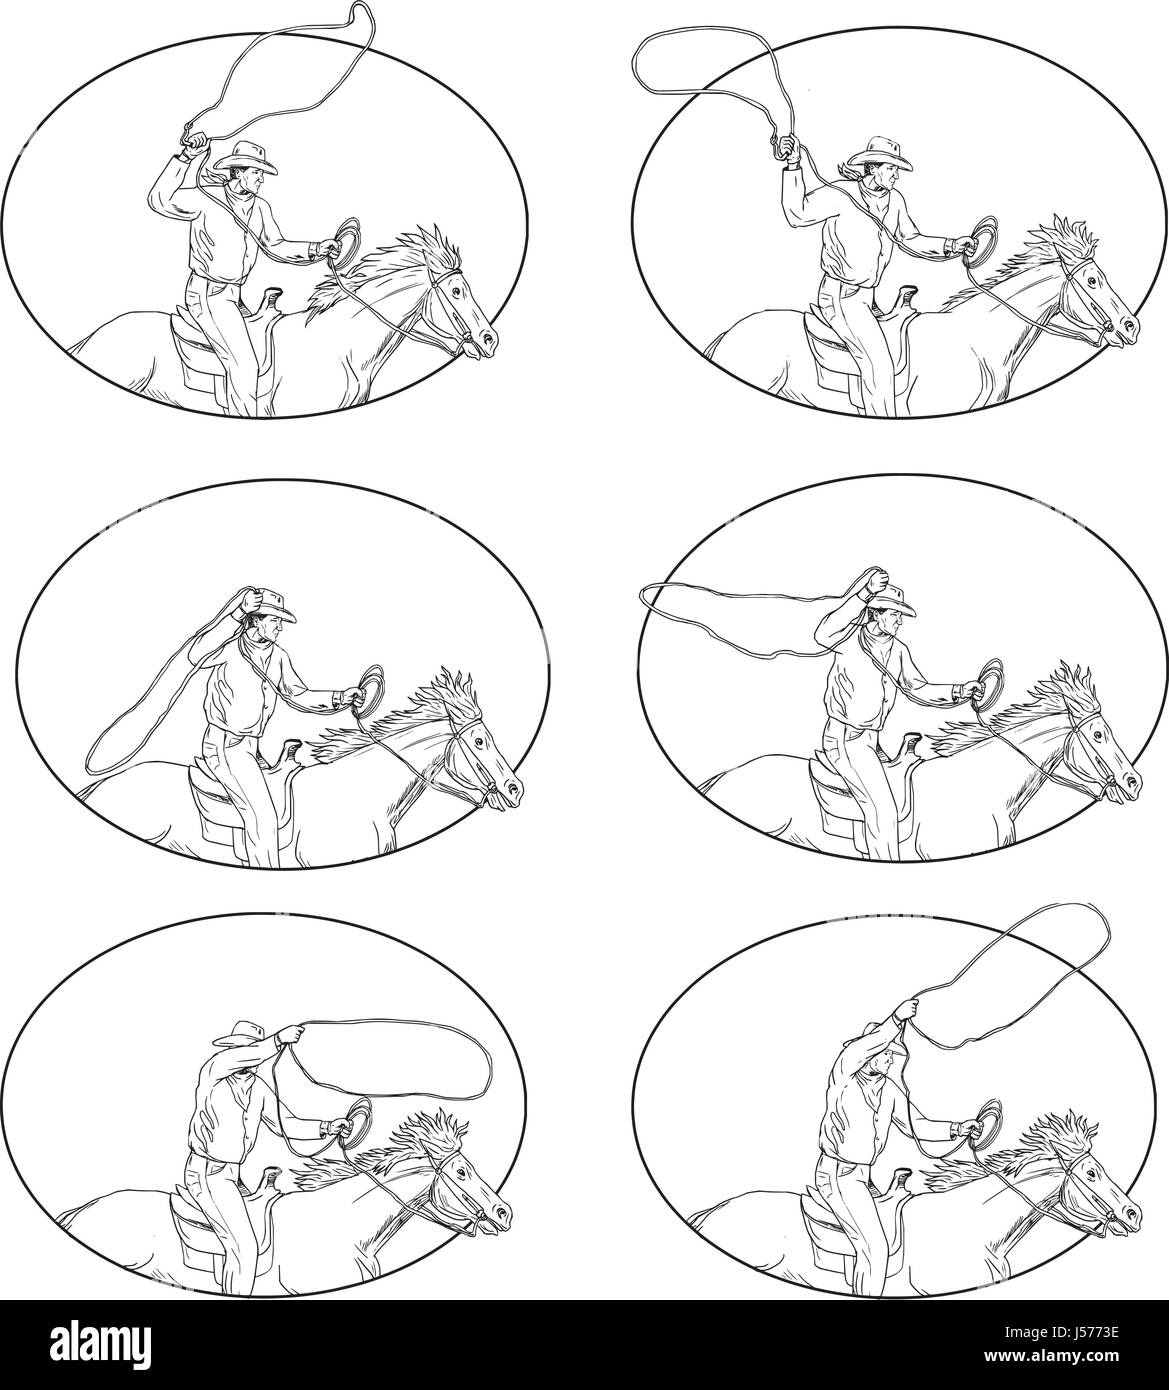 Collection set of illustrations of  a rodeo cowboy holding lasso riding horse viewed in different movements set inside oval shape done in drawing sket Stock Vector